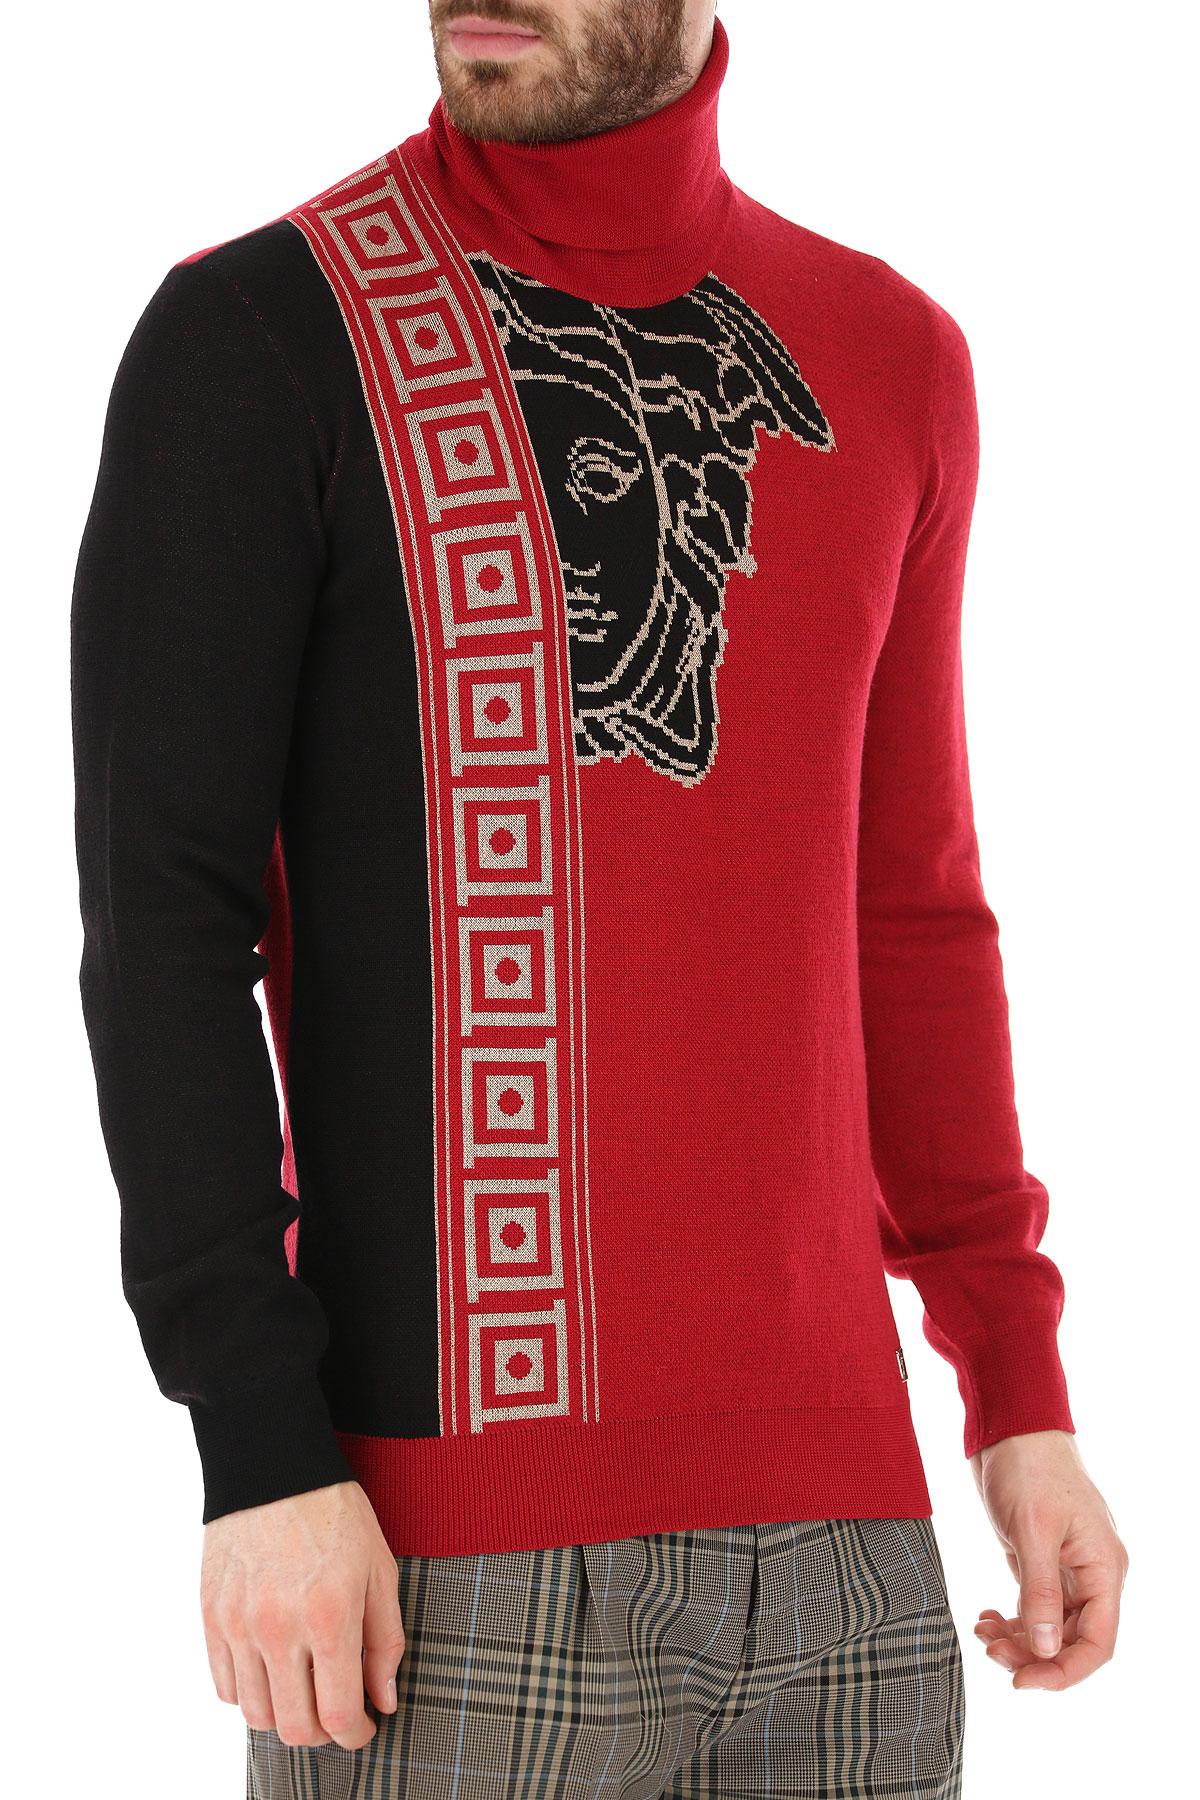 Versace Wool Sweater For Men Jumper in Bordeaux Red (Red) for Men - Lyst